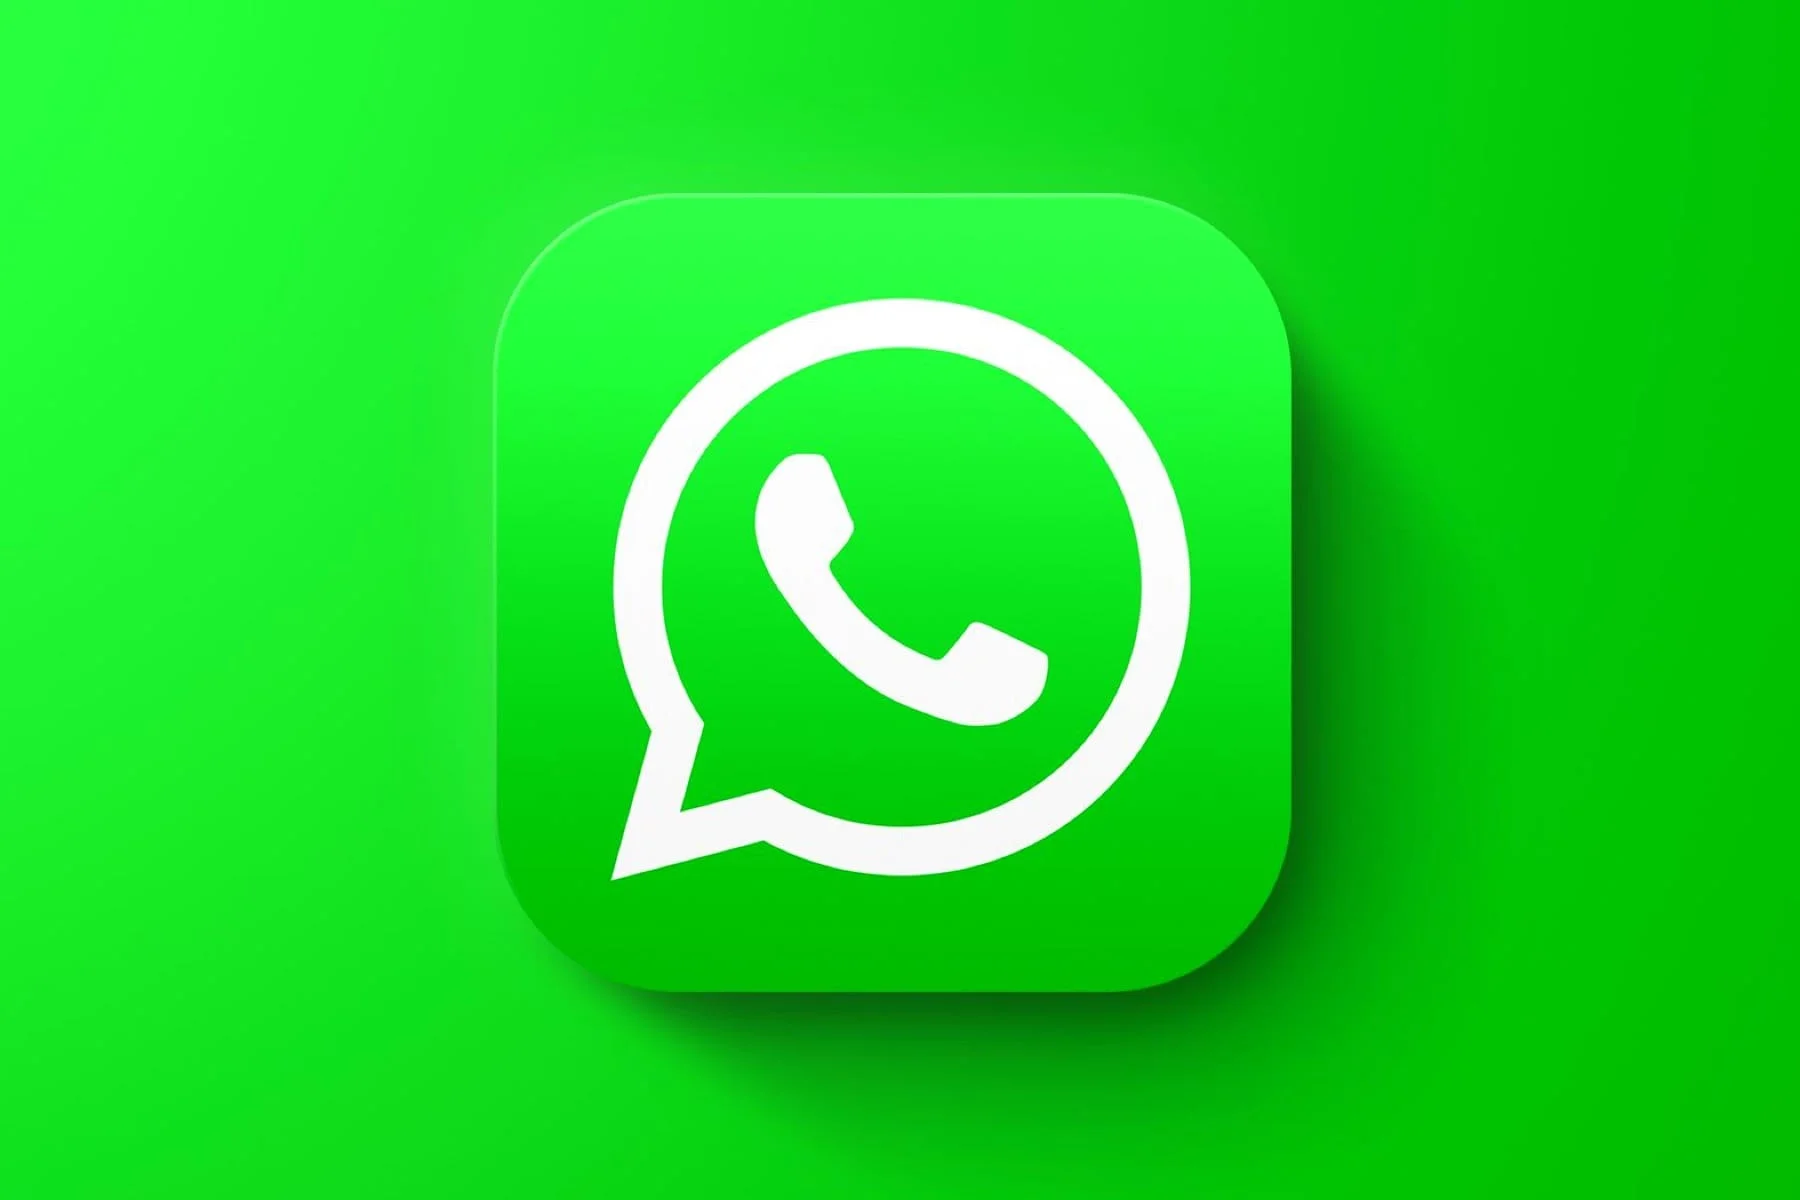 The updated design of WhatsApp was demonstrated in insider screenshots